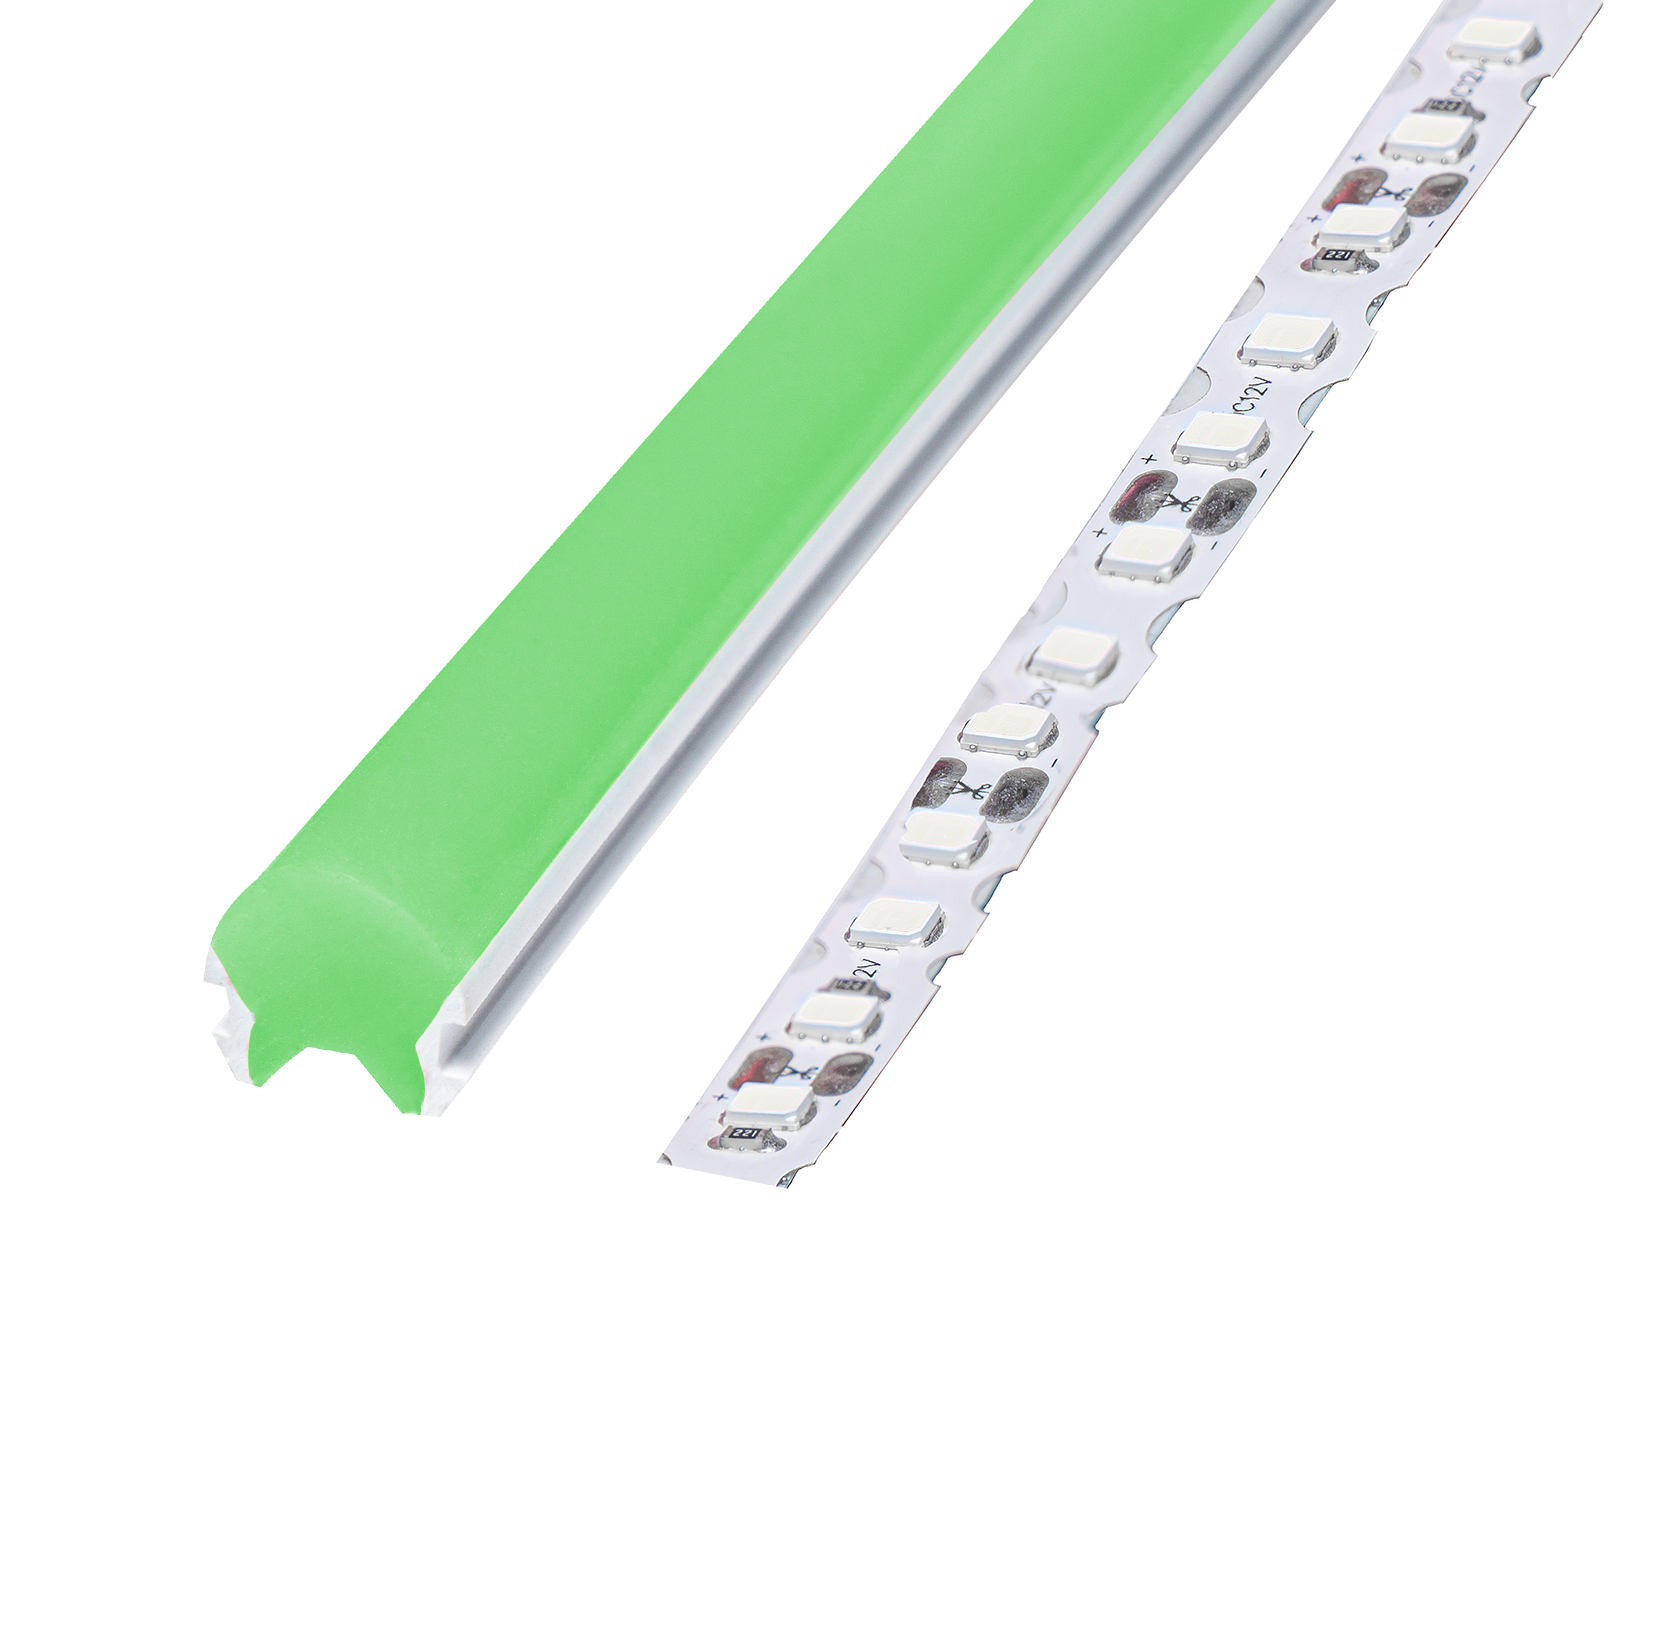 LED flessibile NEON LED flessibile in silicone in due pezzi verde, DC12V, 8  mm